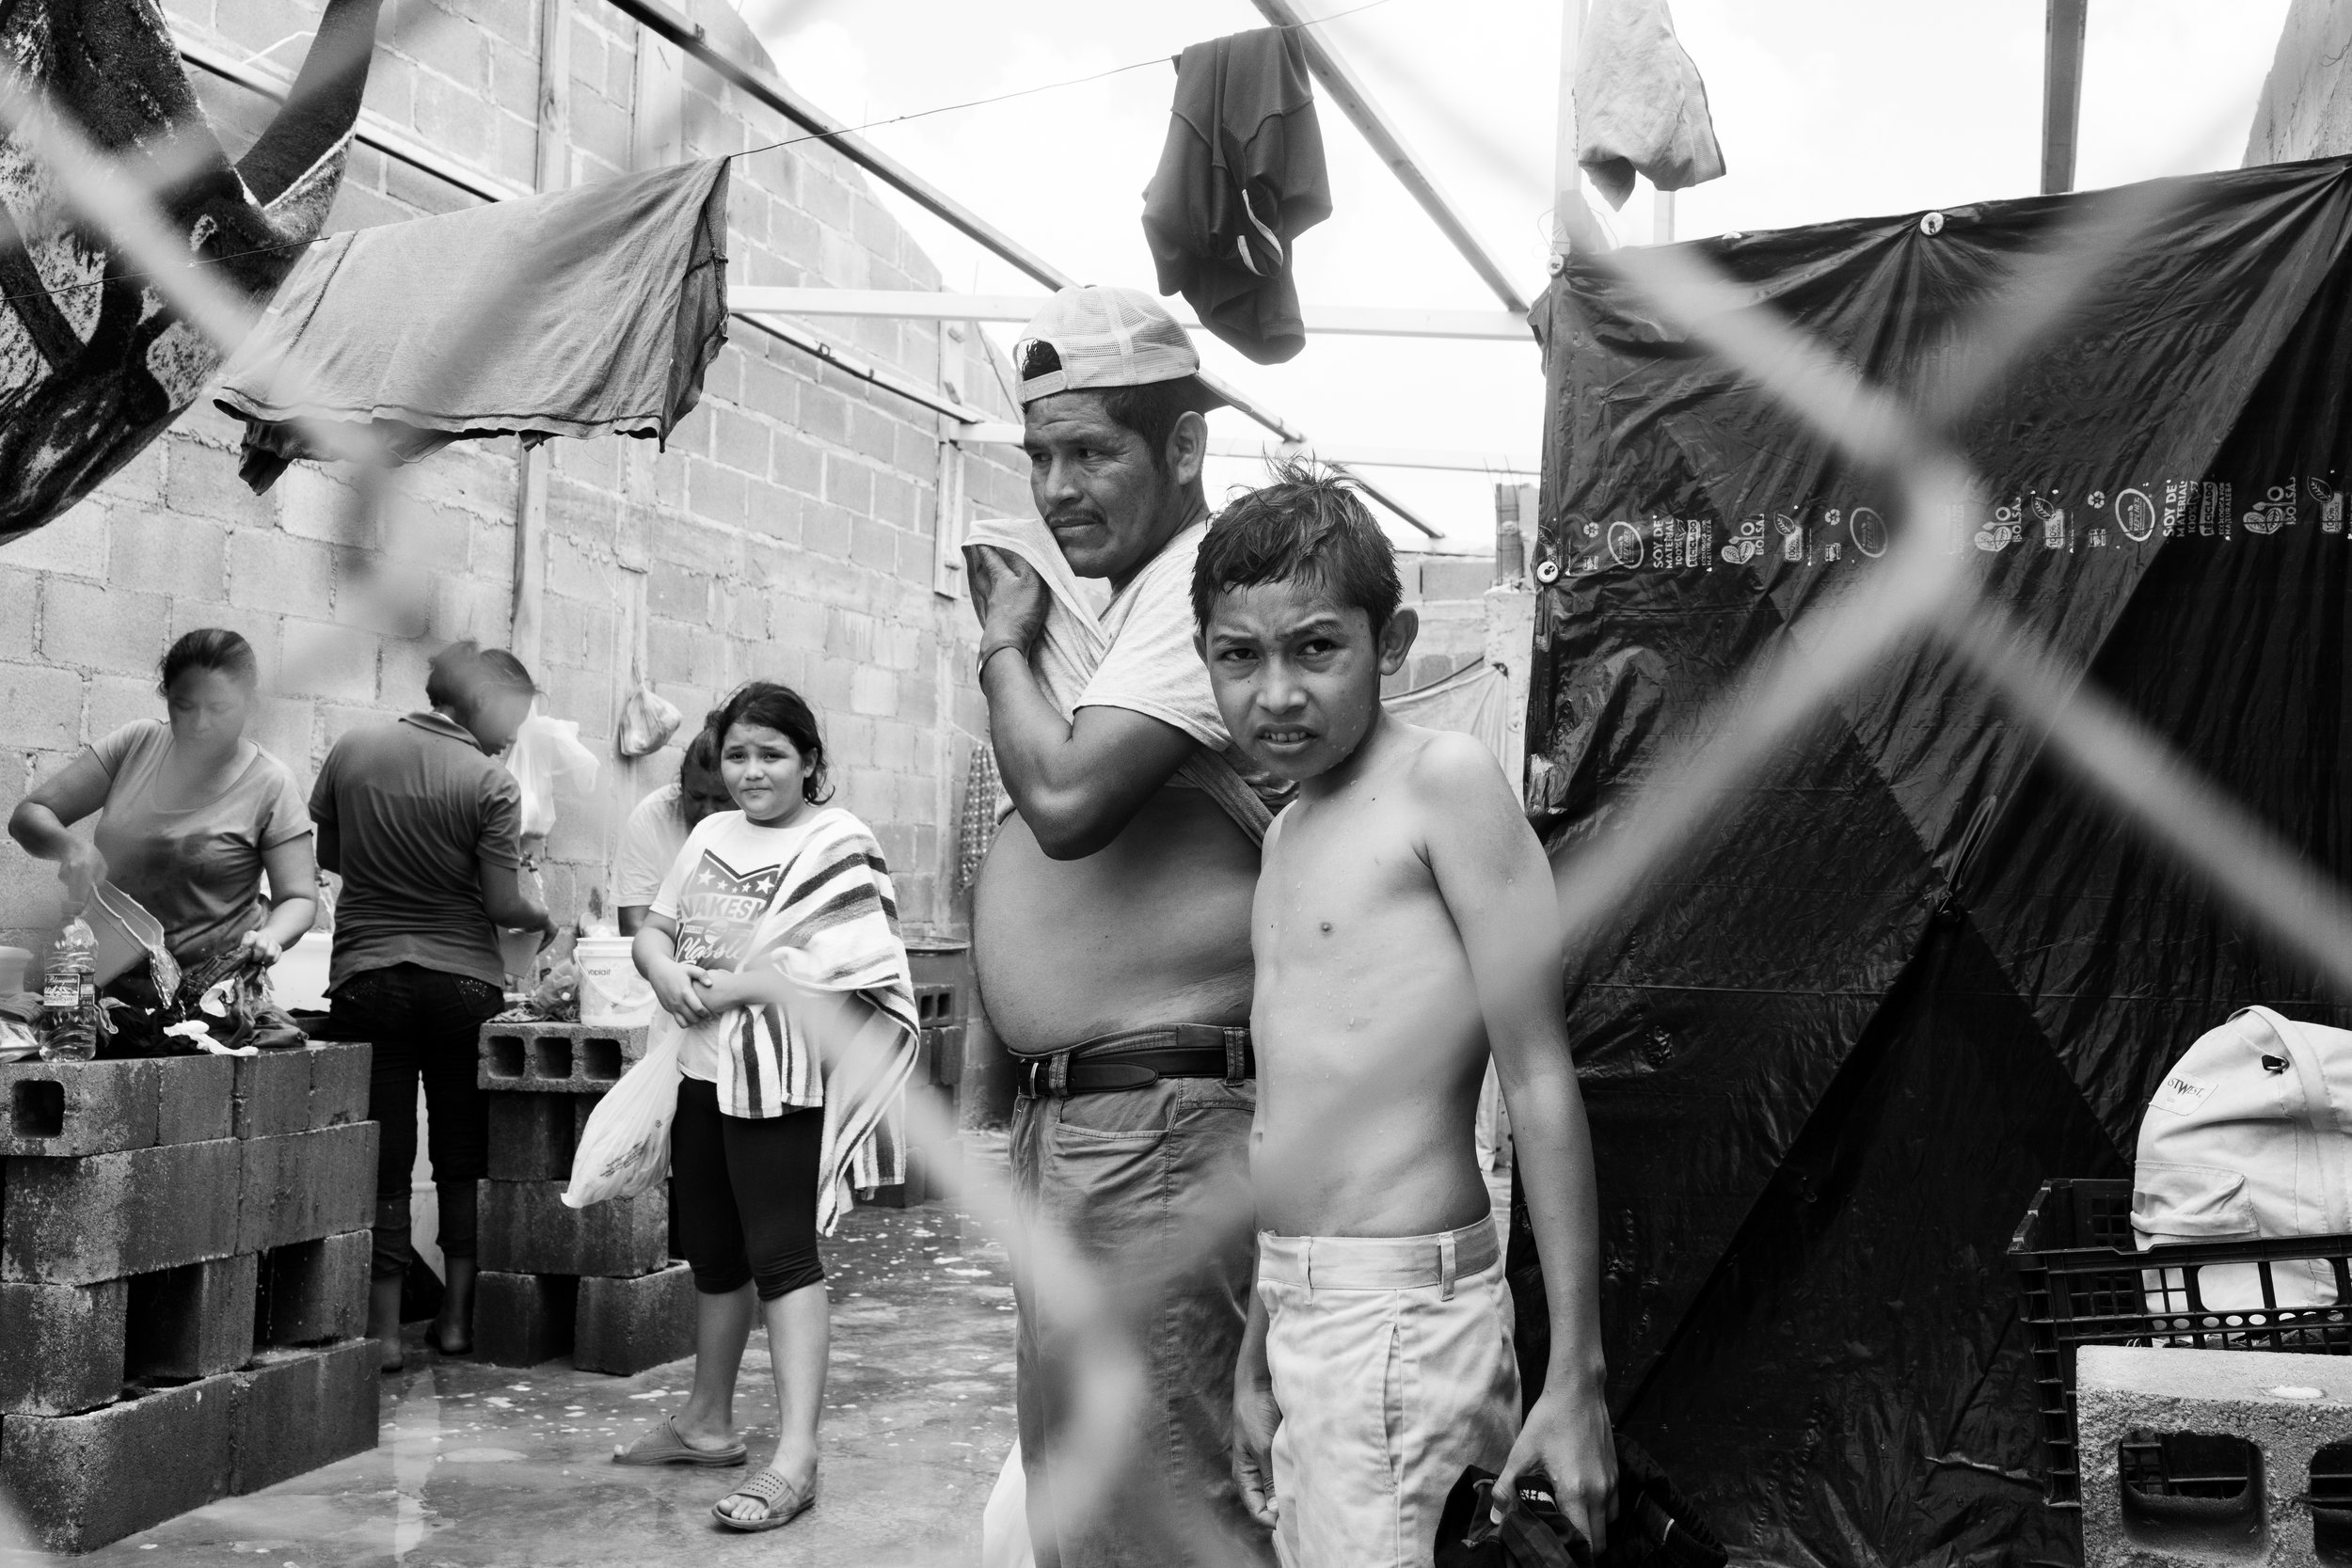  A young boy looks out of the make-shift shower facilities at the migrant camp in Reynosa, Mexico. 